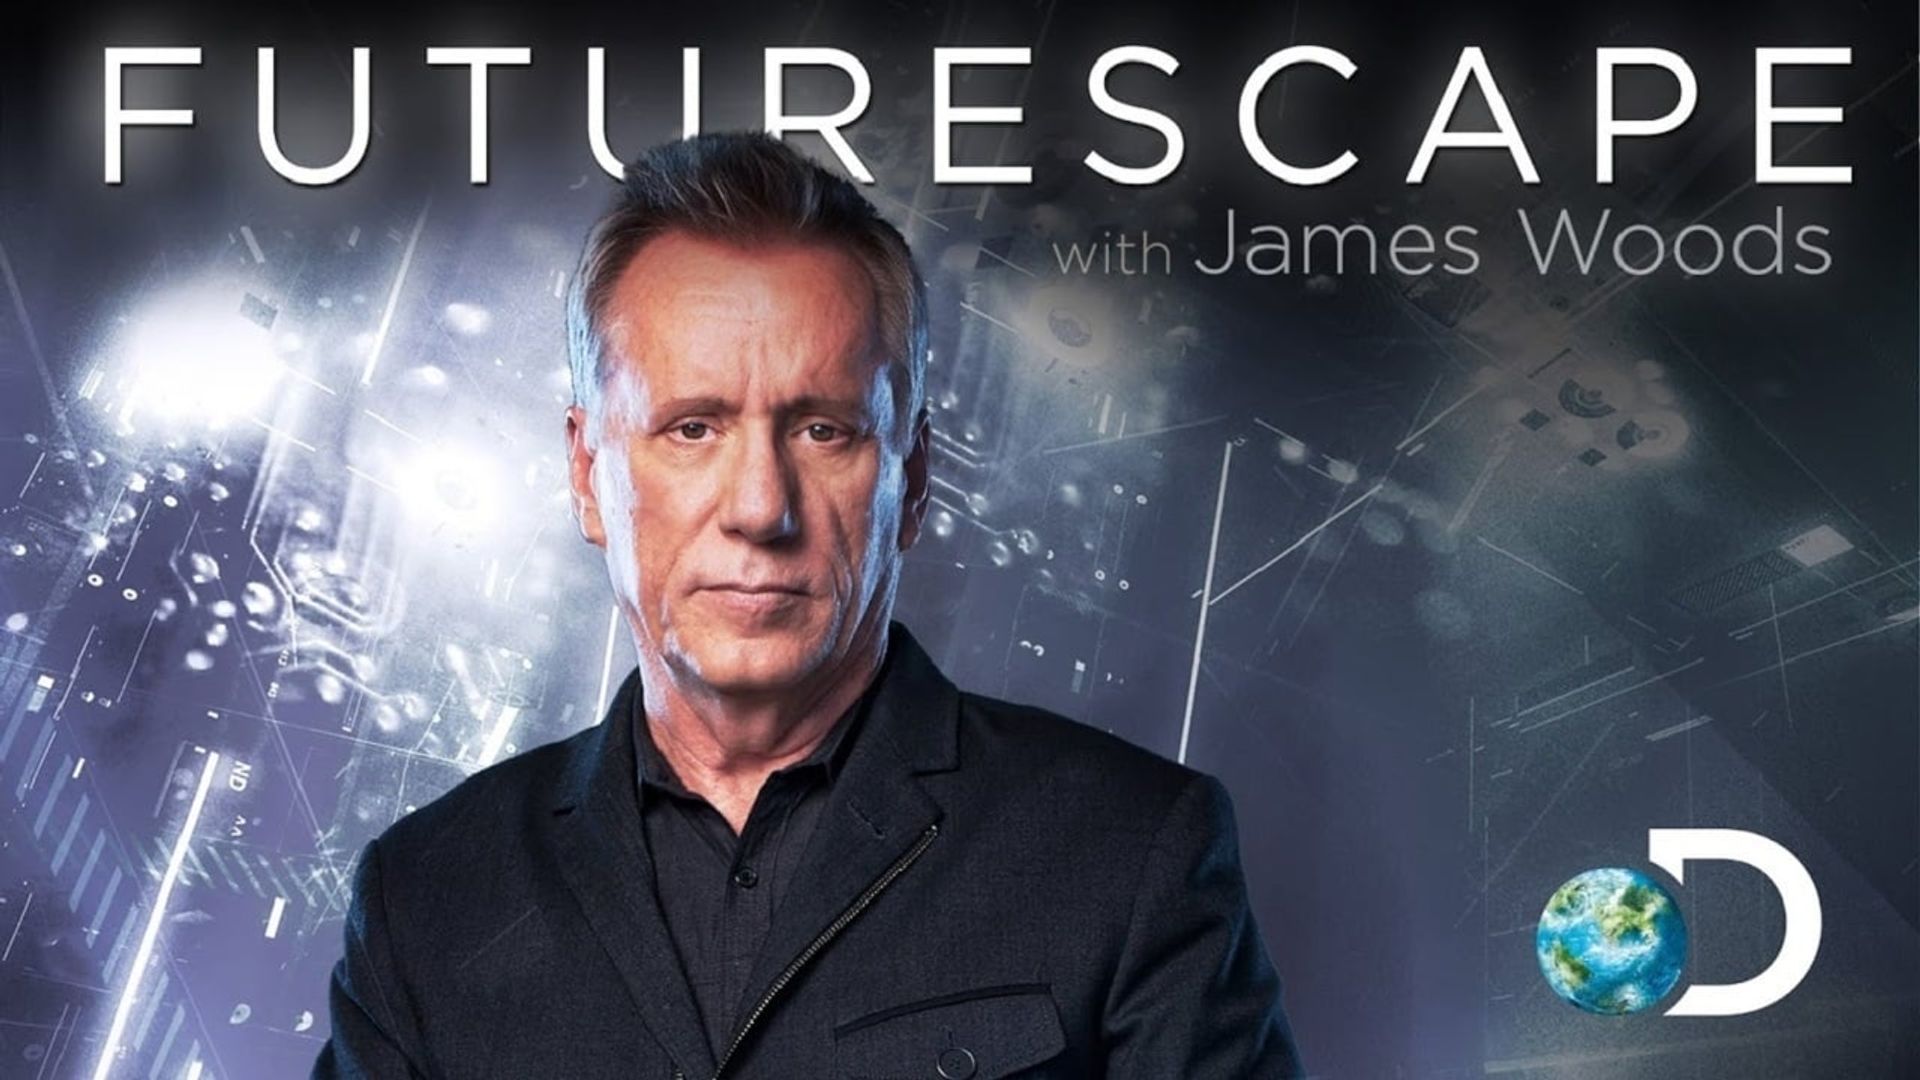 Futurescape with James Woods background